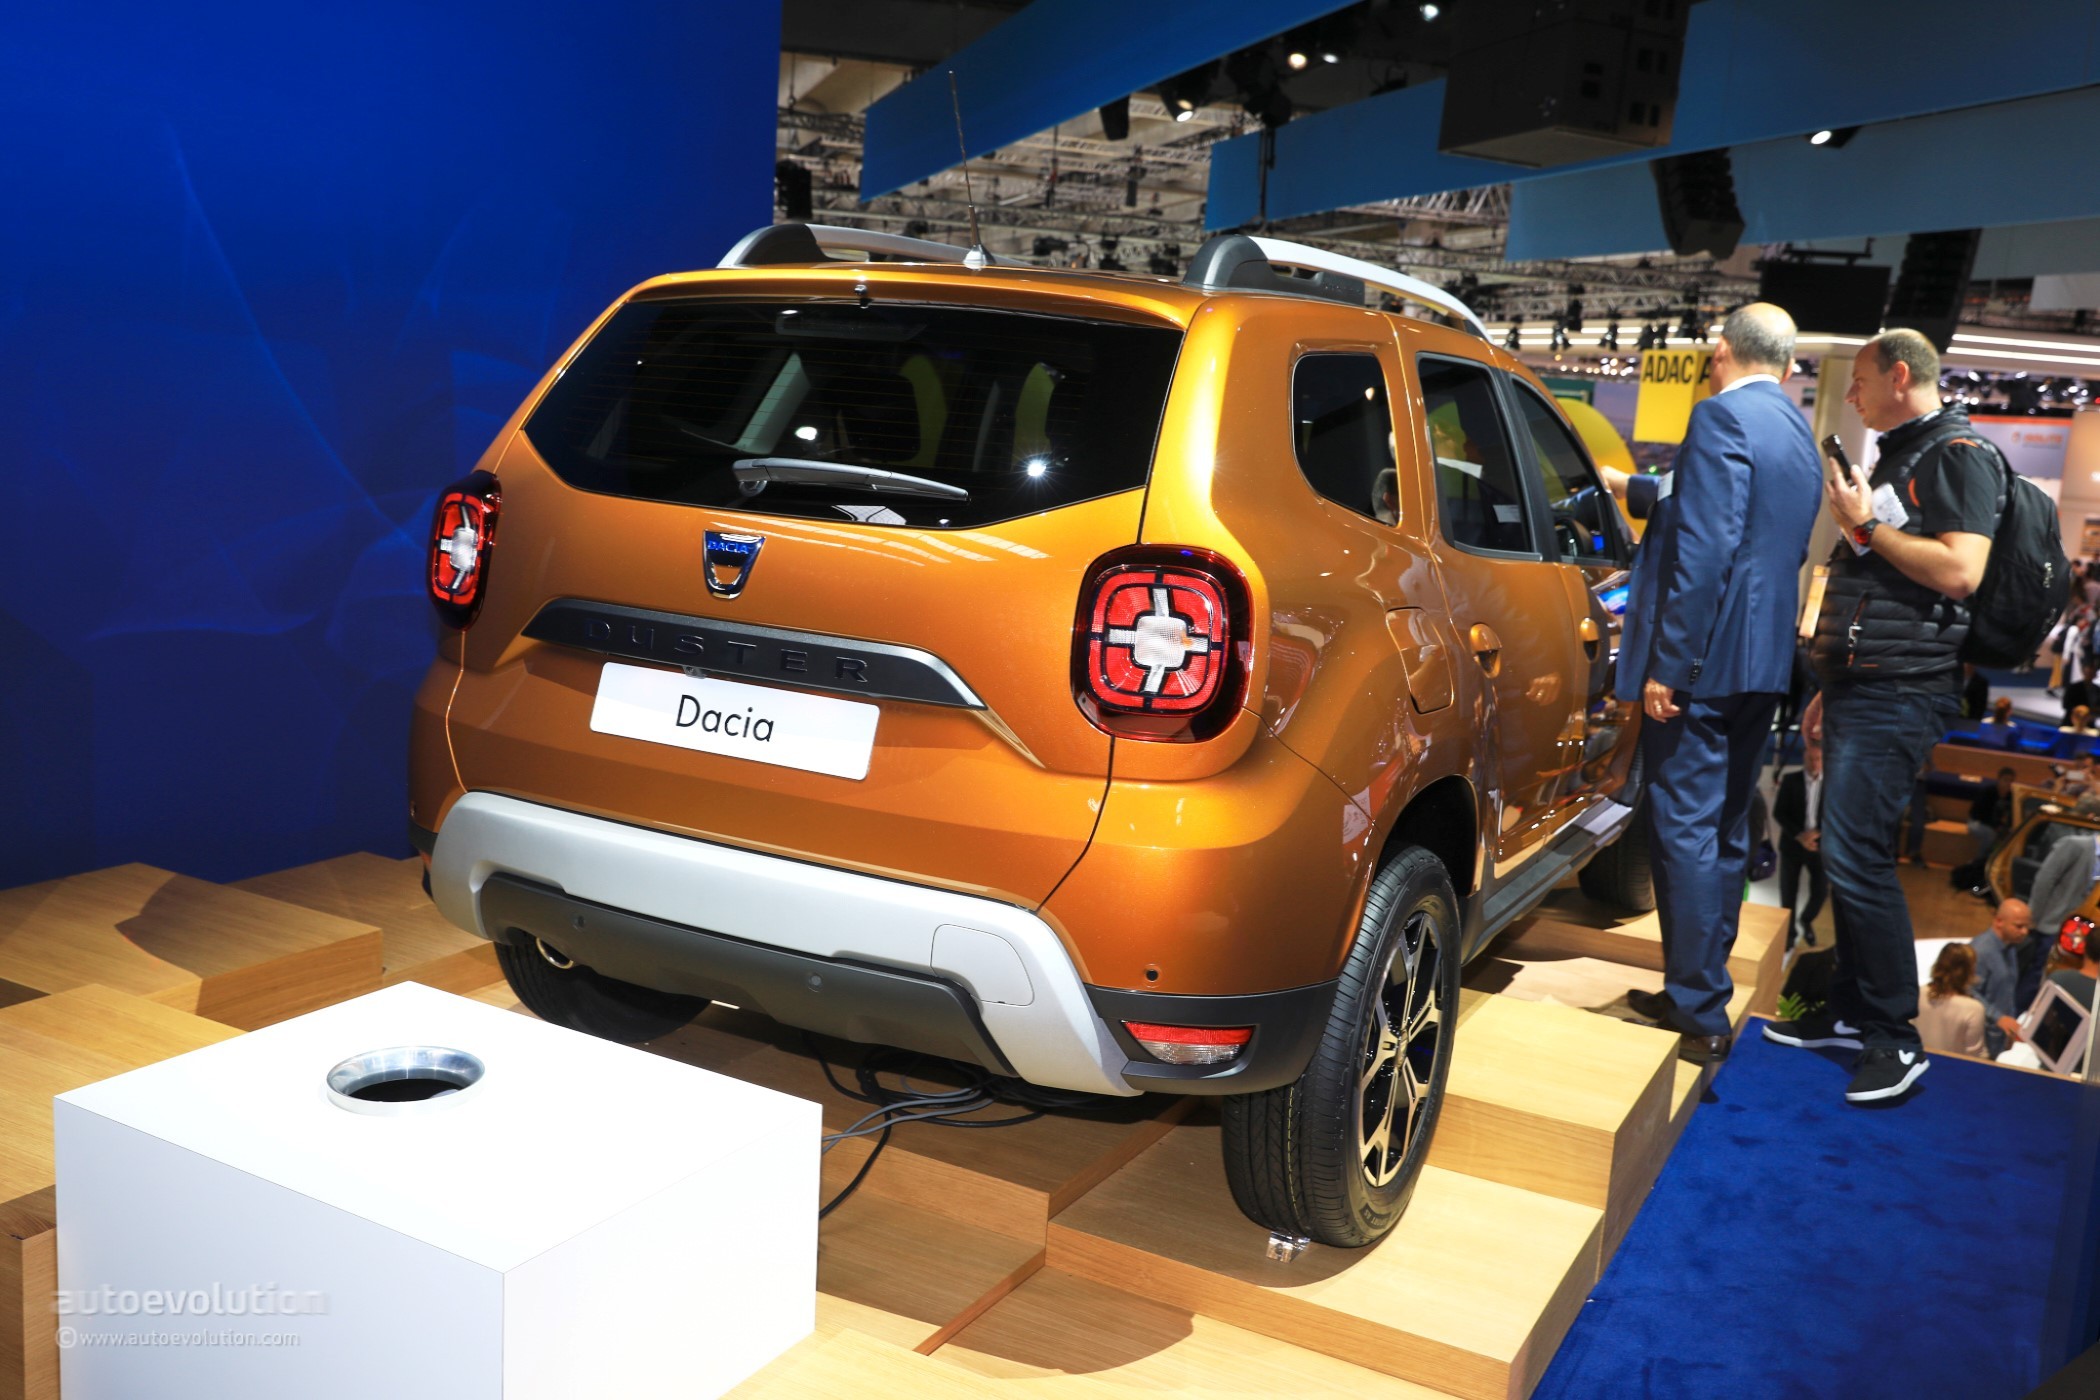 2018 Dacia Duster’s multimedia/infotainment systems revealed